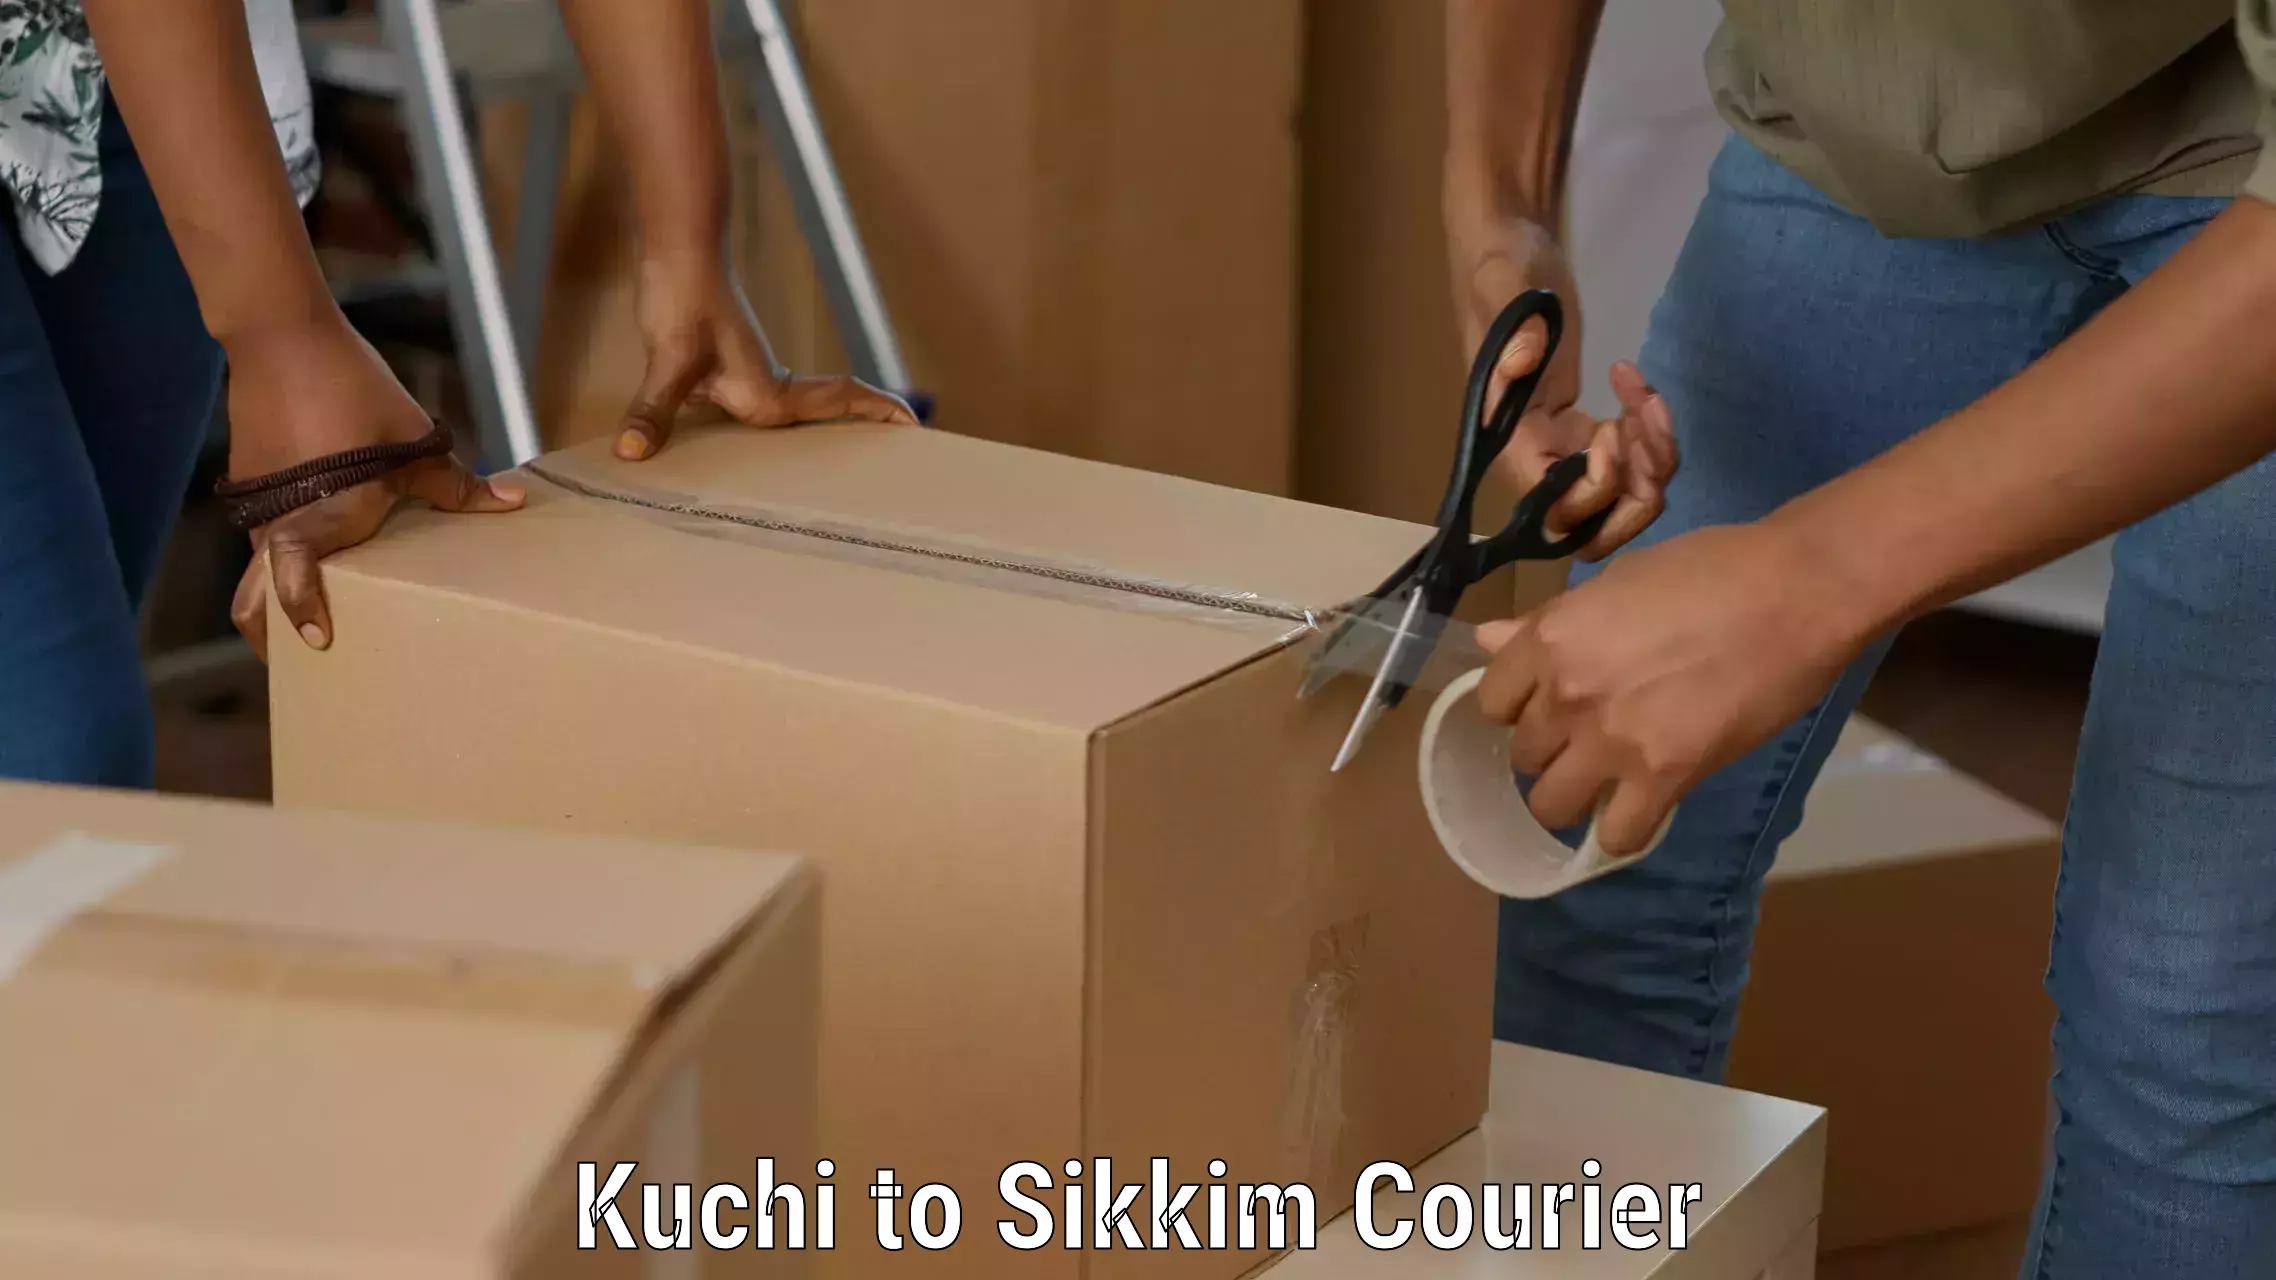 Nationwide courier service Kuchi to Pelling